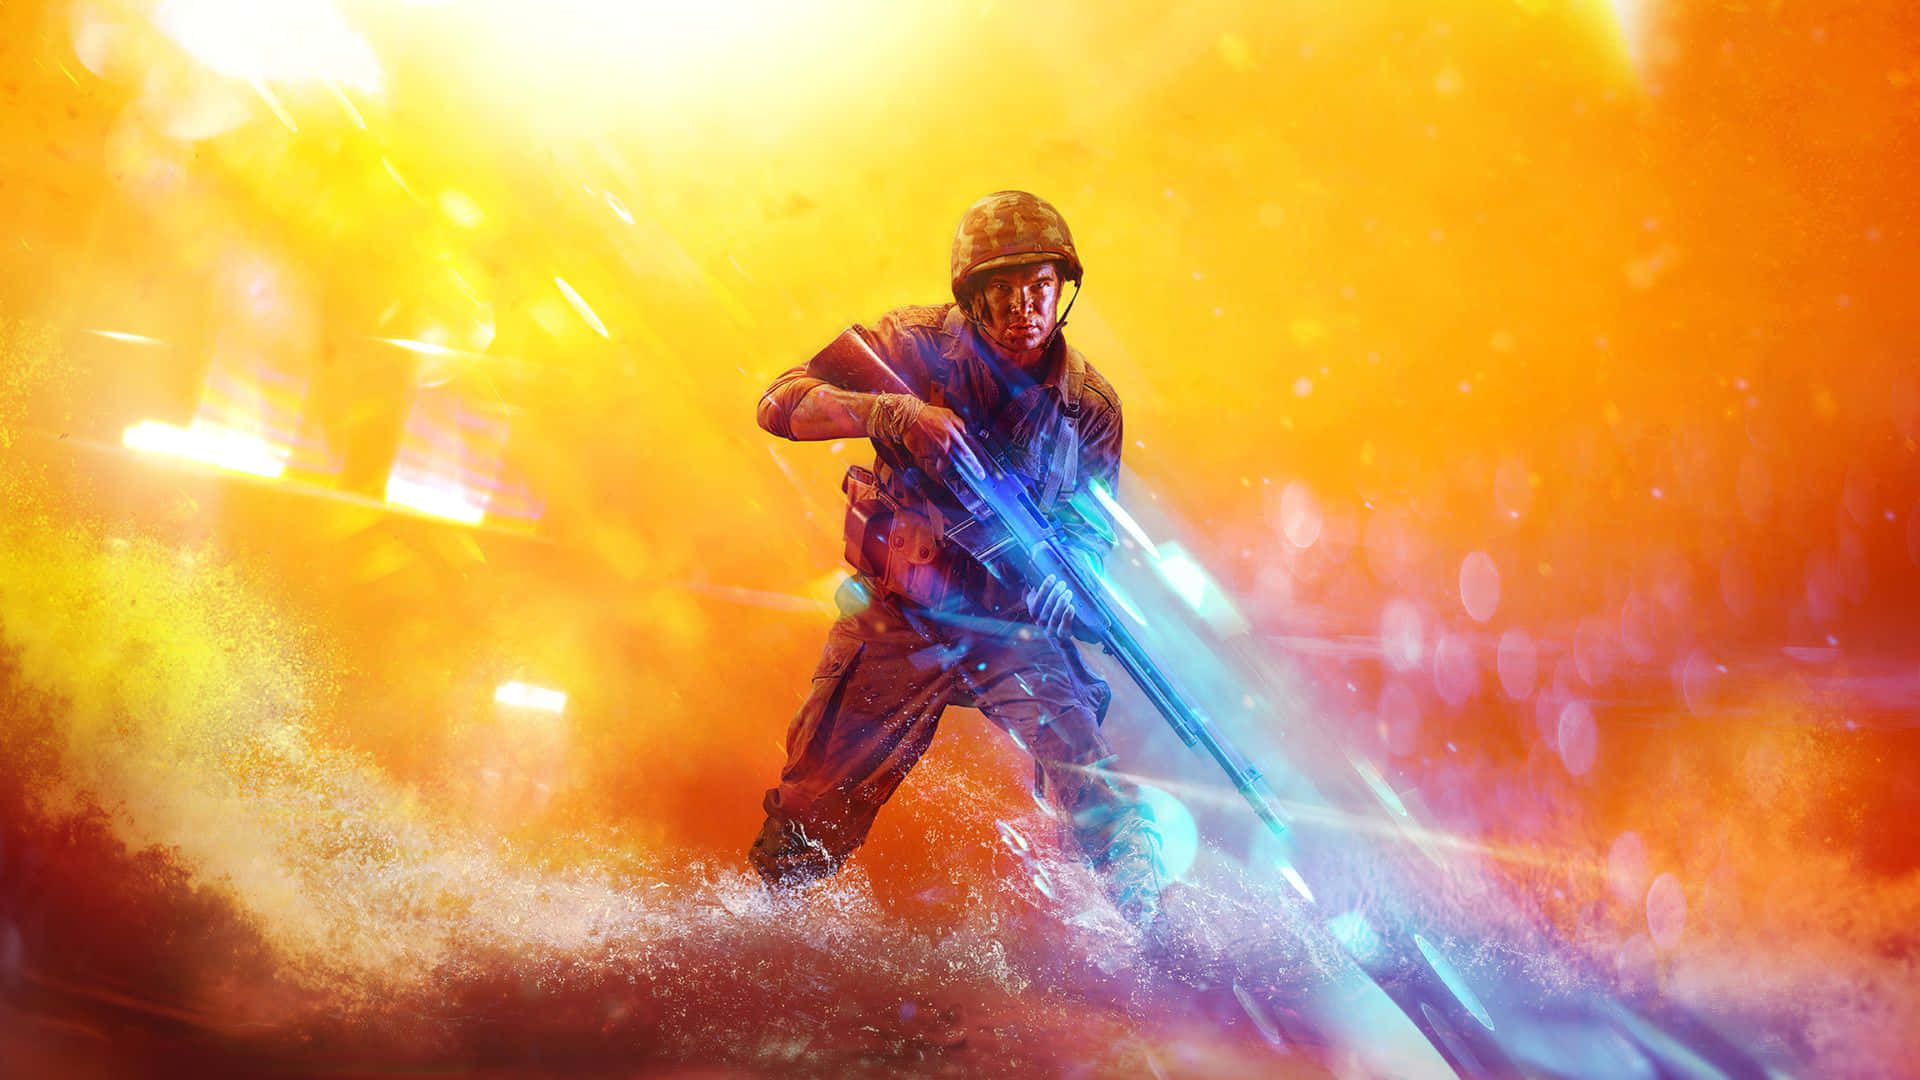 "Defeat the enemy and take home the victory in Battlefield V".